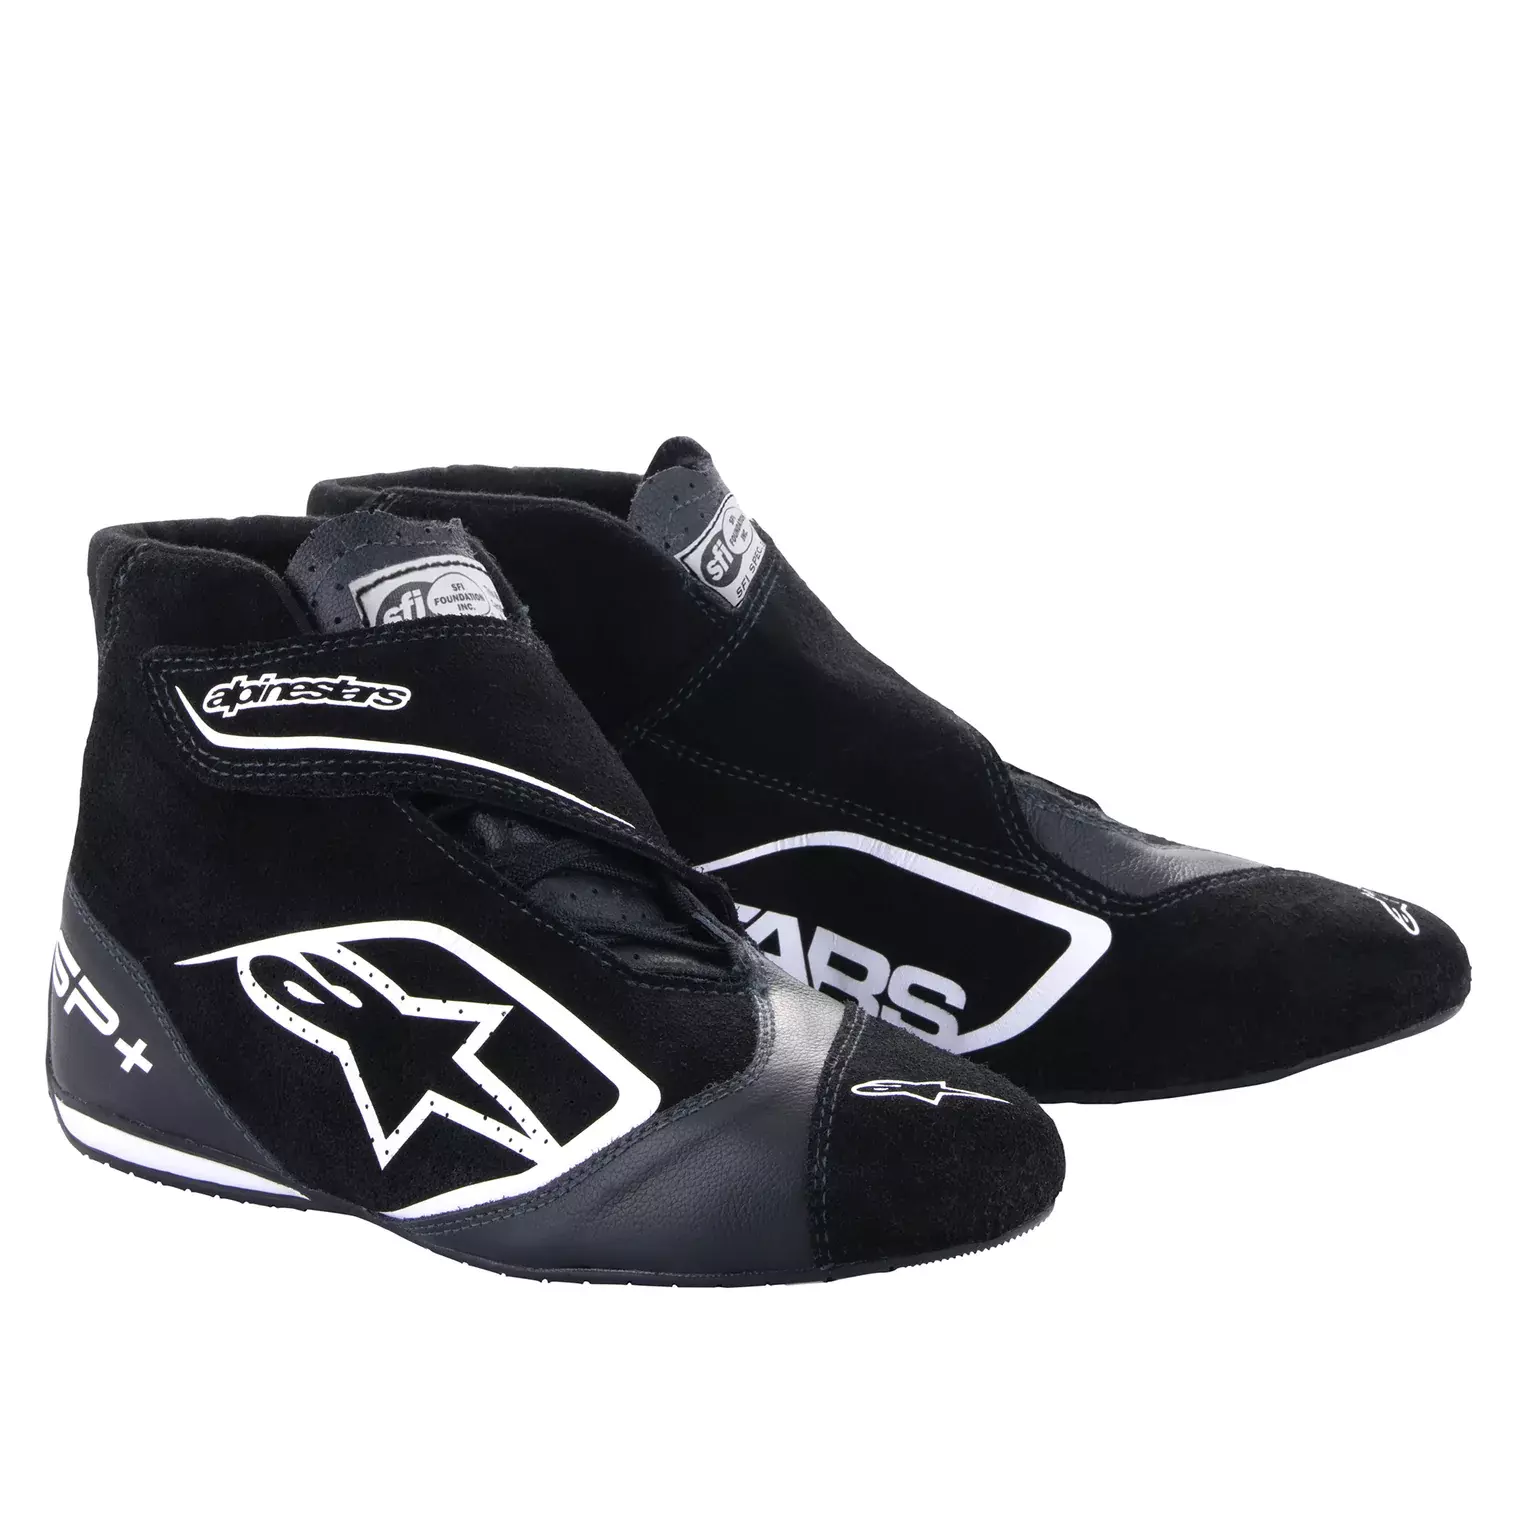 Alpinestars 2710823-12-11 Driving Shoe, SP+, Mid-Top, SFI 3.3, FIA Approved, Suede Outer, Nomex Inner, Black / White, Size 11, Pair